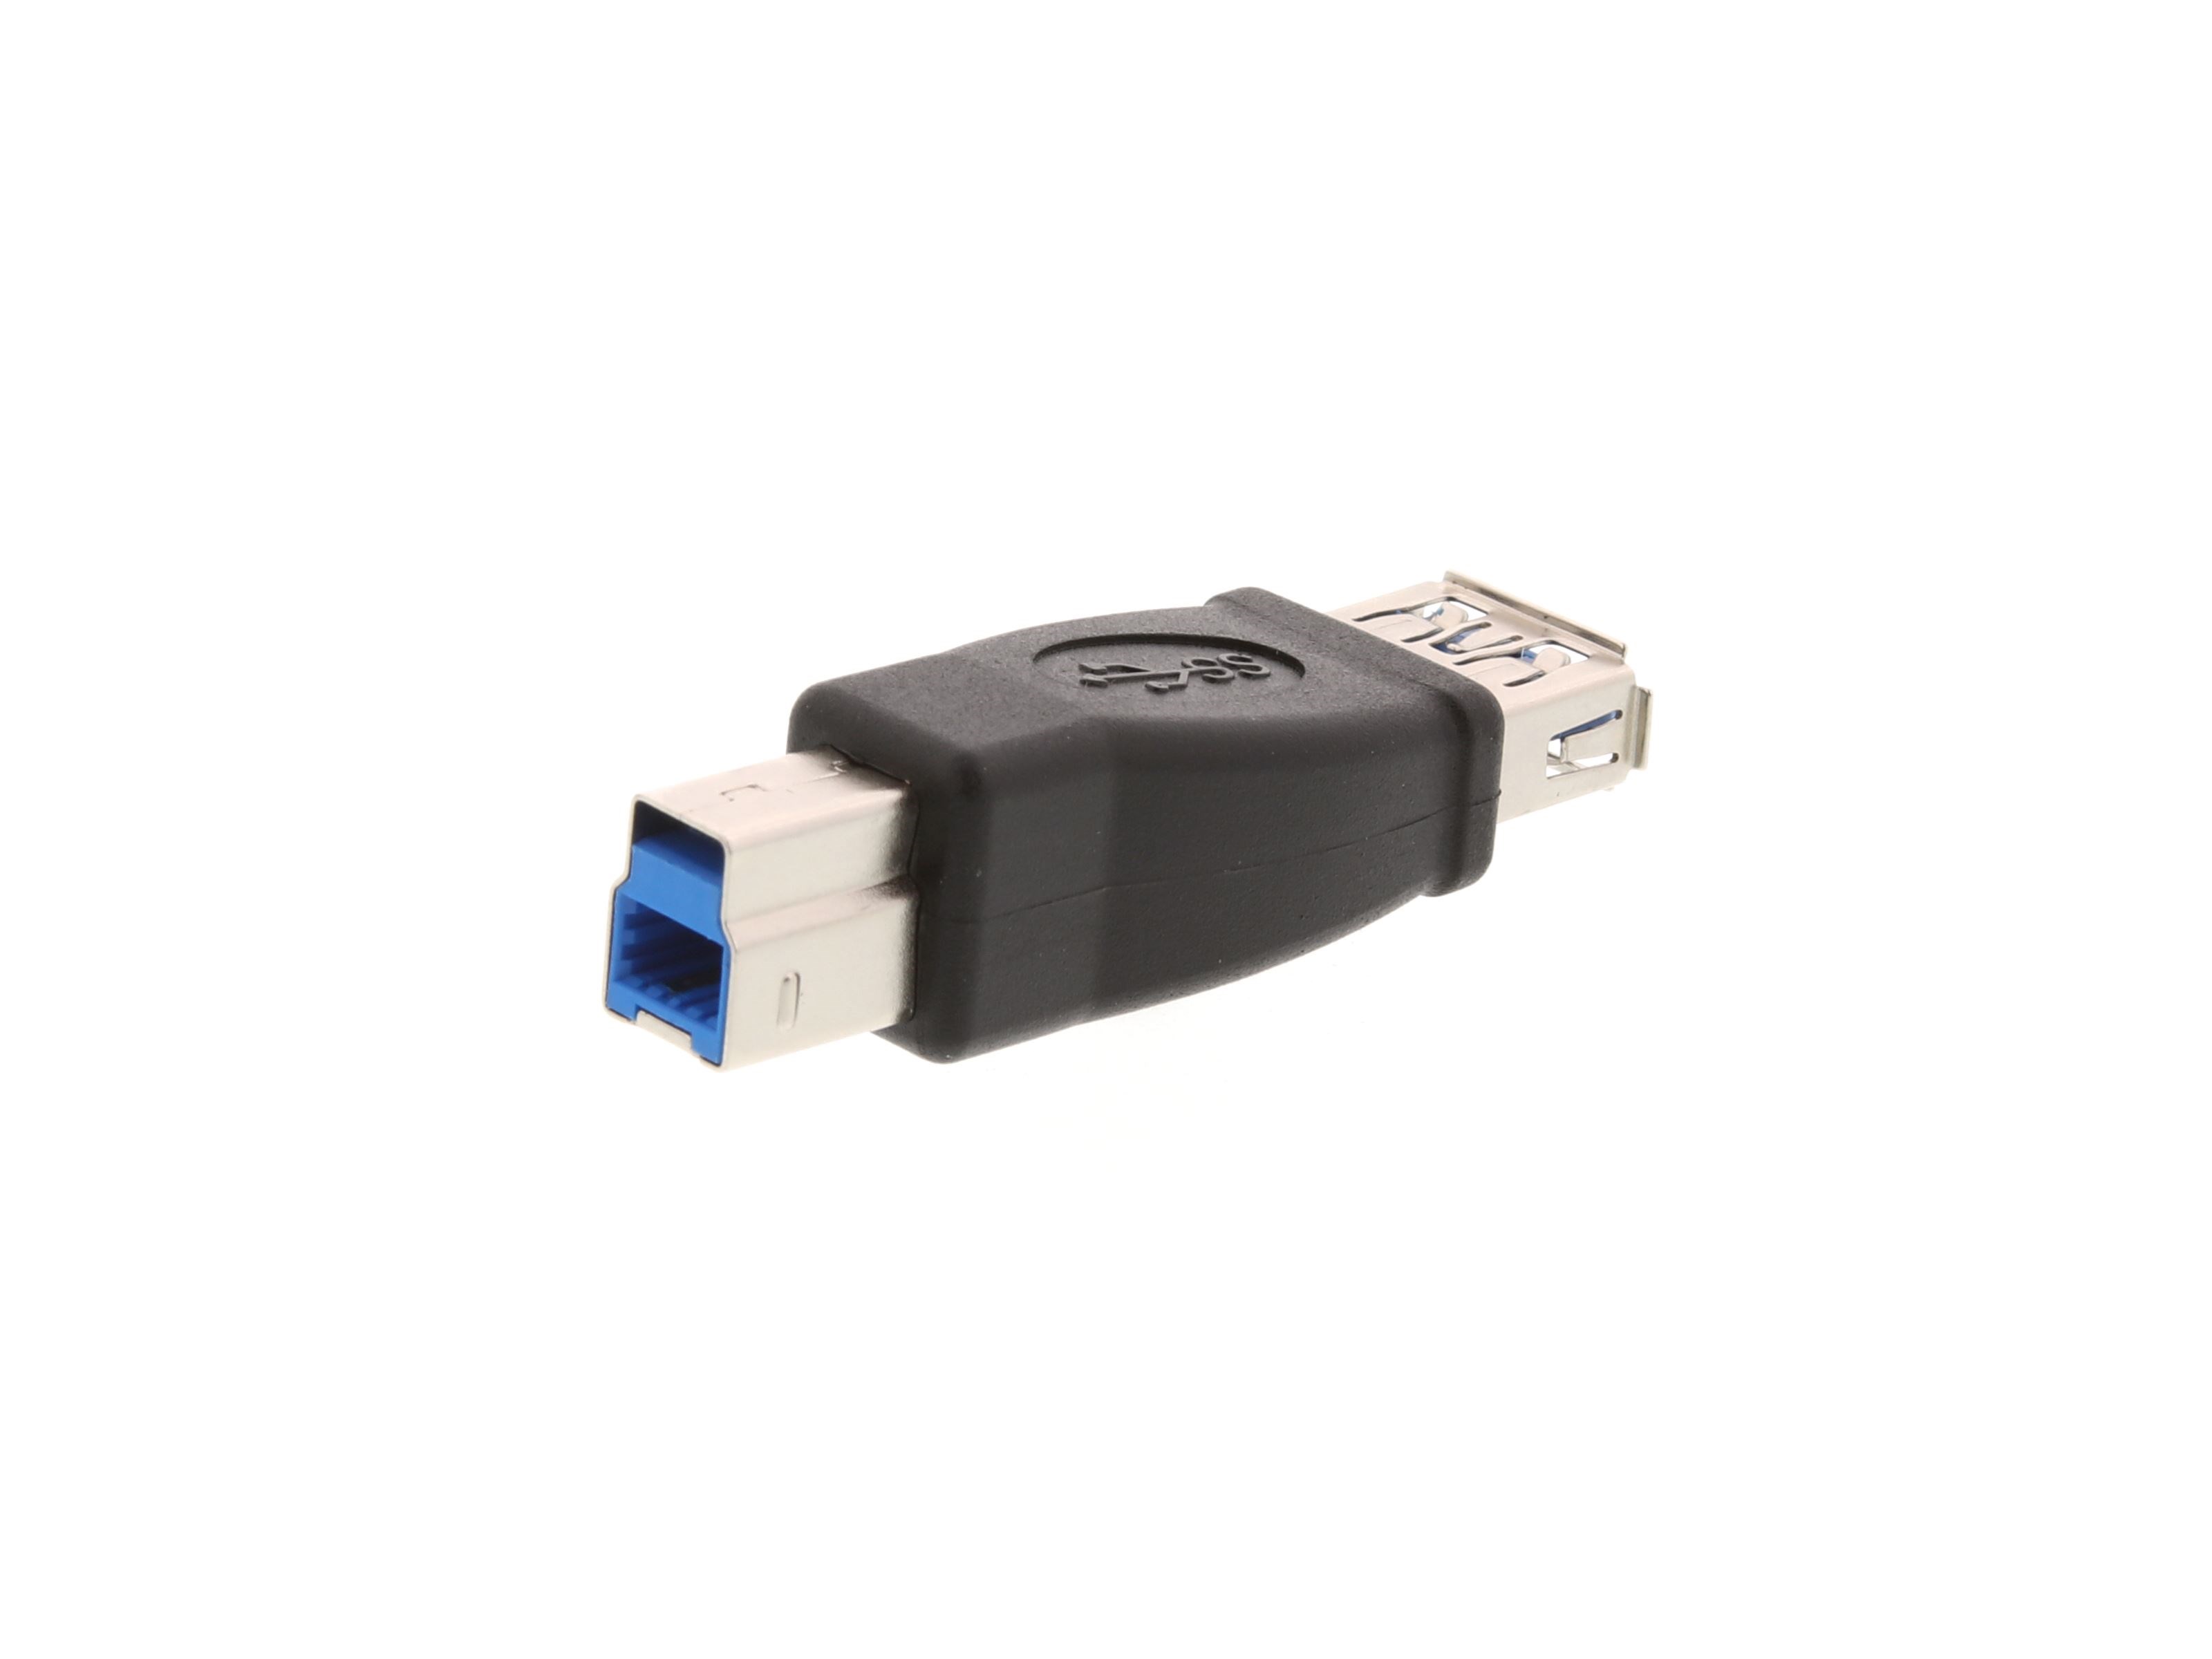 USB 3.0 Adapter USB A Female USB B Male - 5 Pack at Cables N More